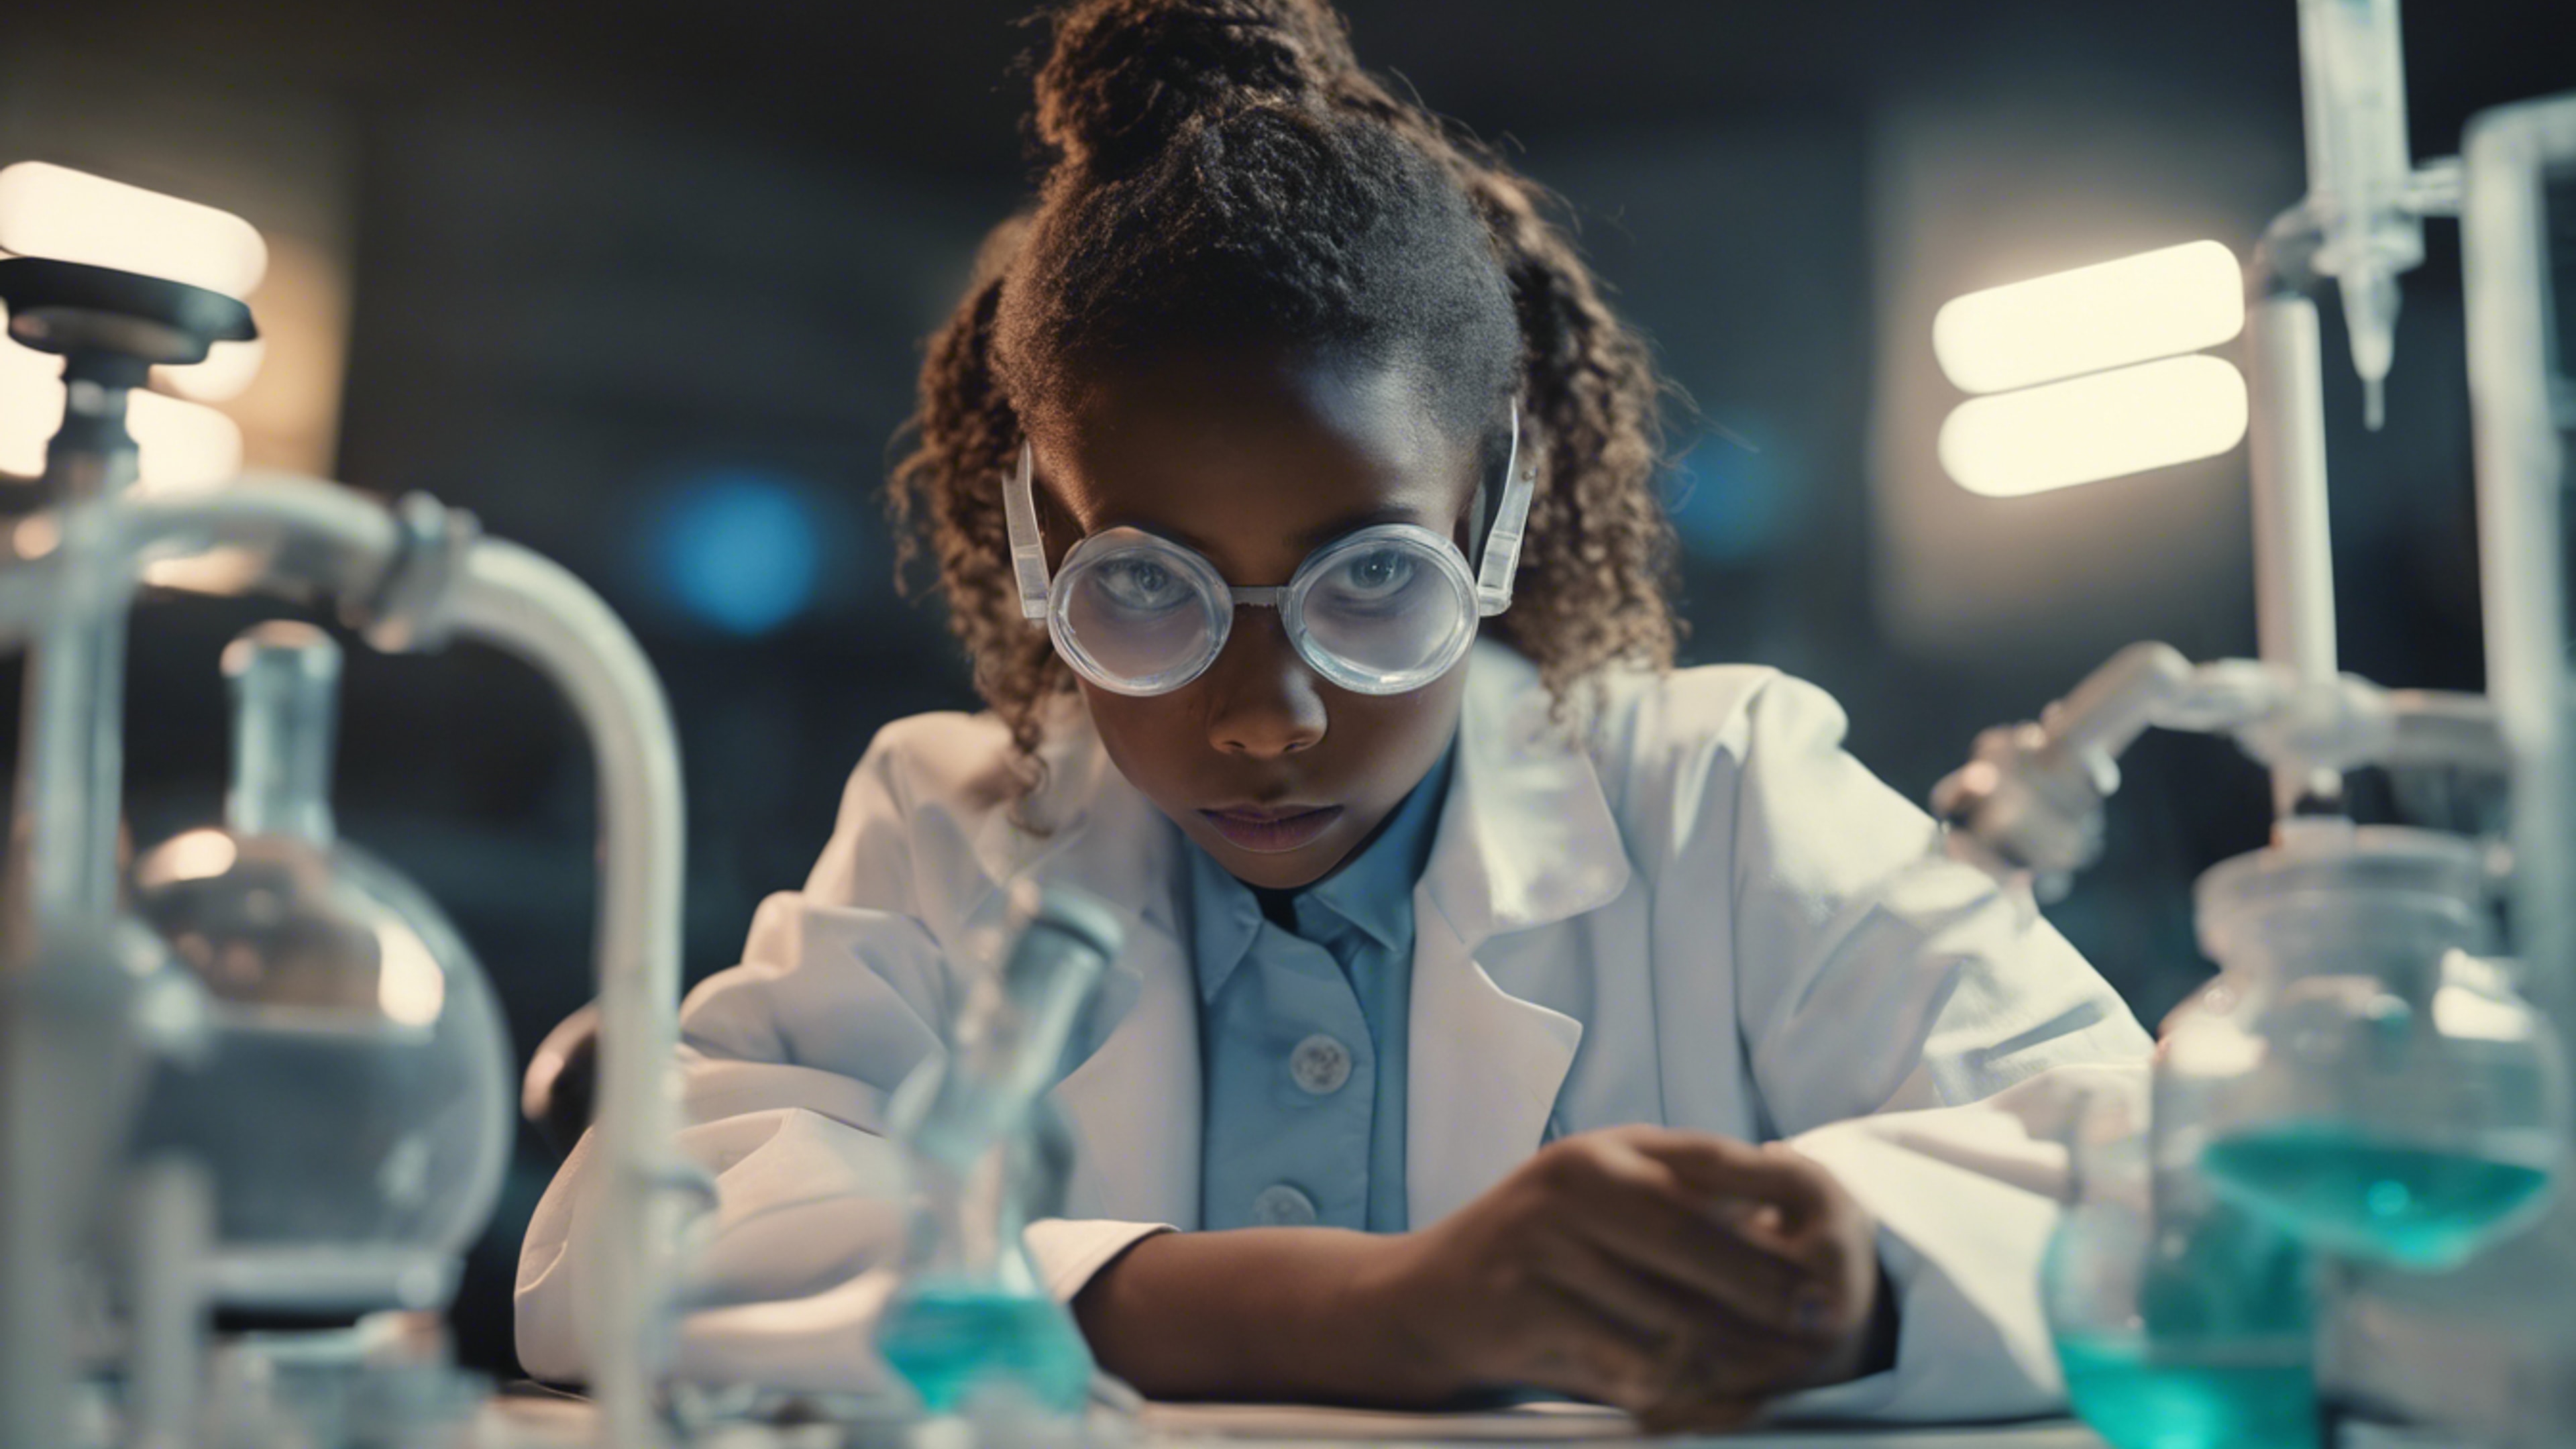 A young black girl wearing goggles and lab coat immersed in doing science experiment. Divar kağızı[448c919503a247f79693]